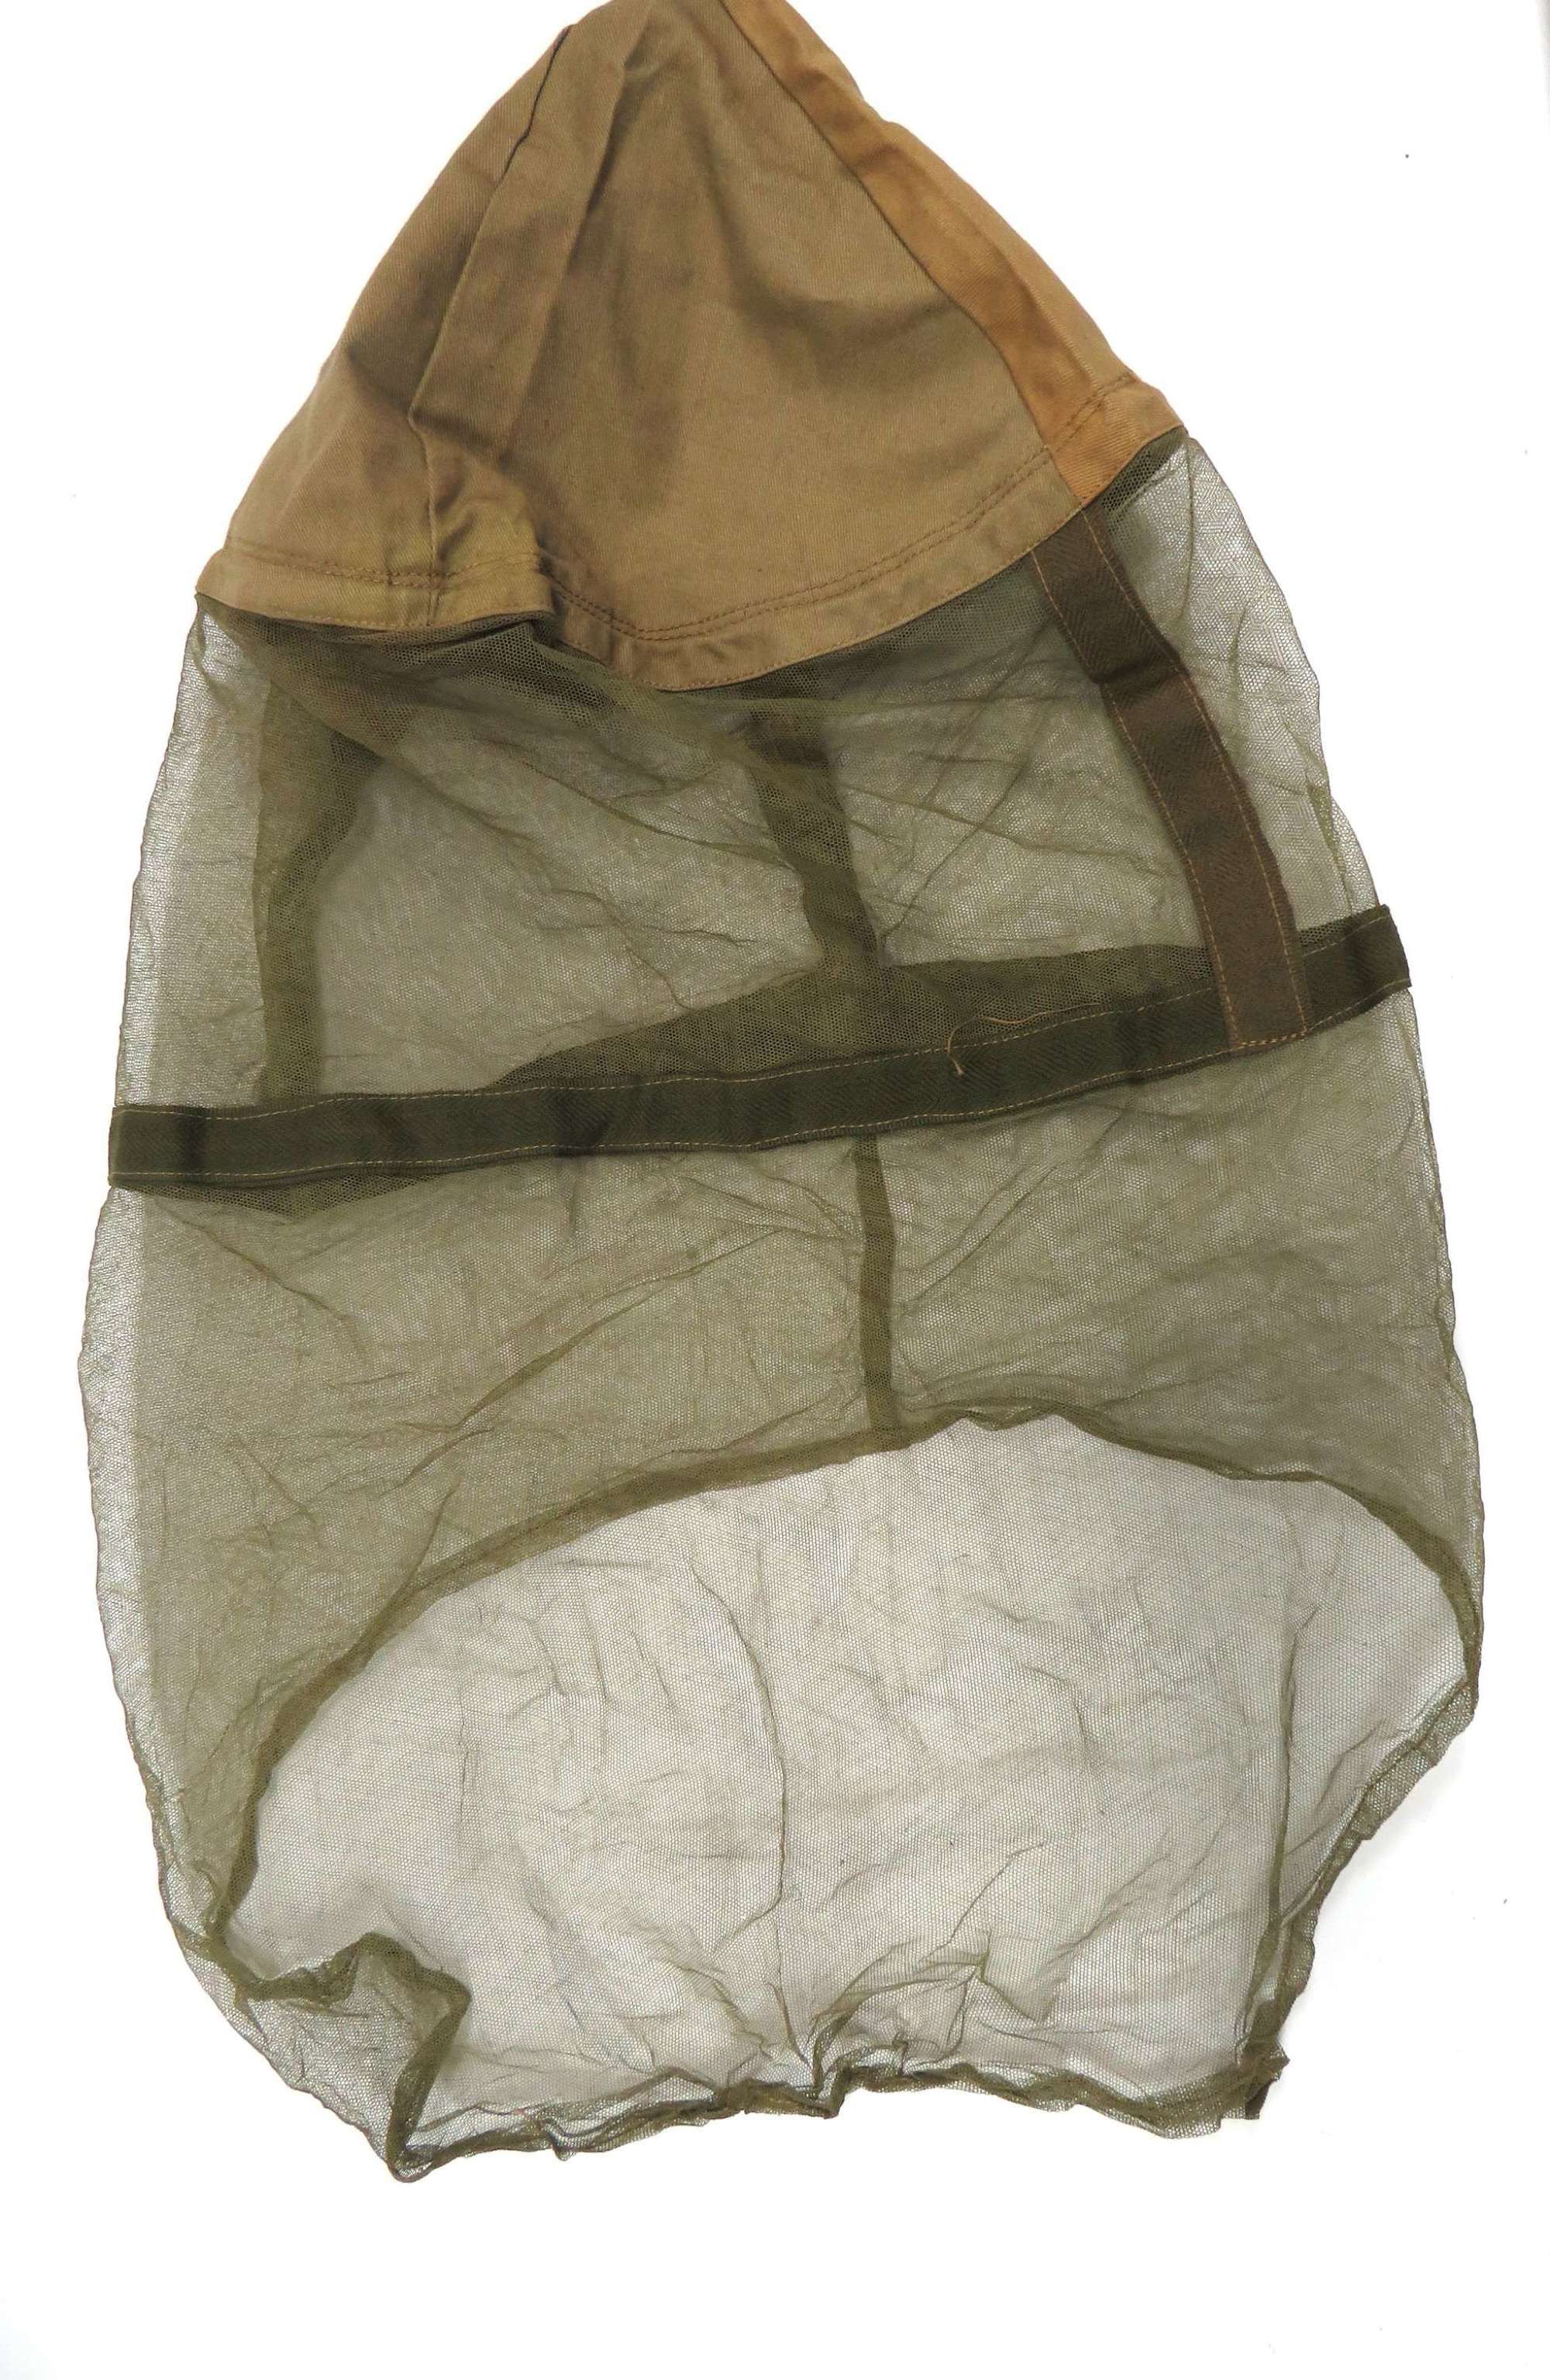 1944 Dated Tropical Mosquito Helmet Net and Cover